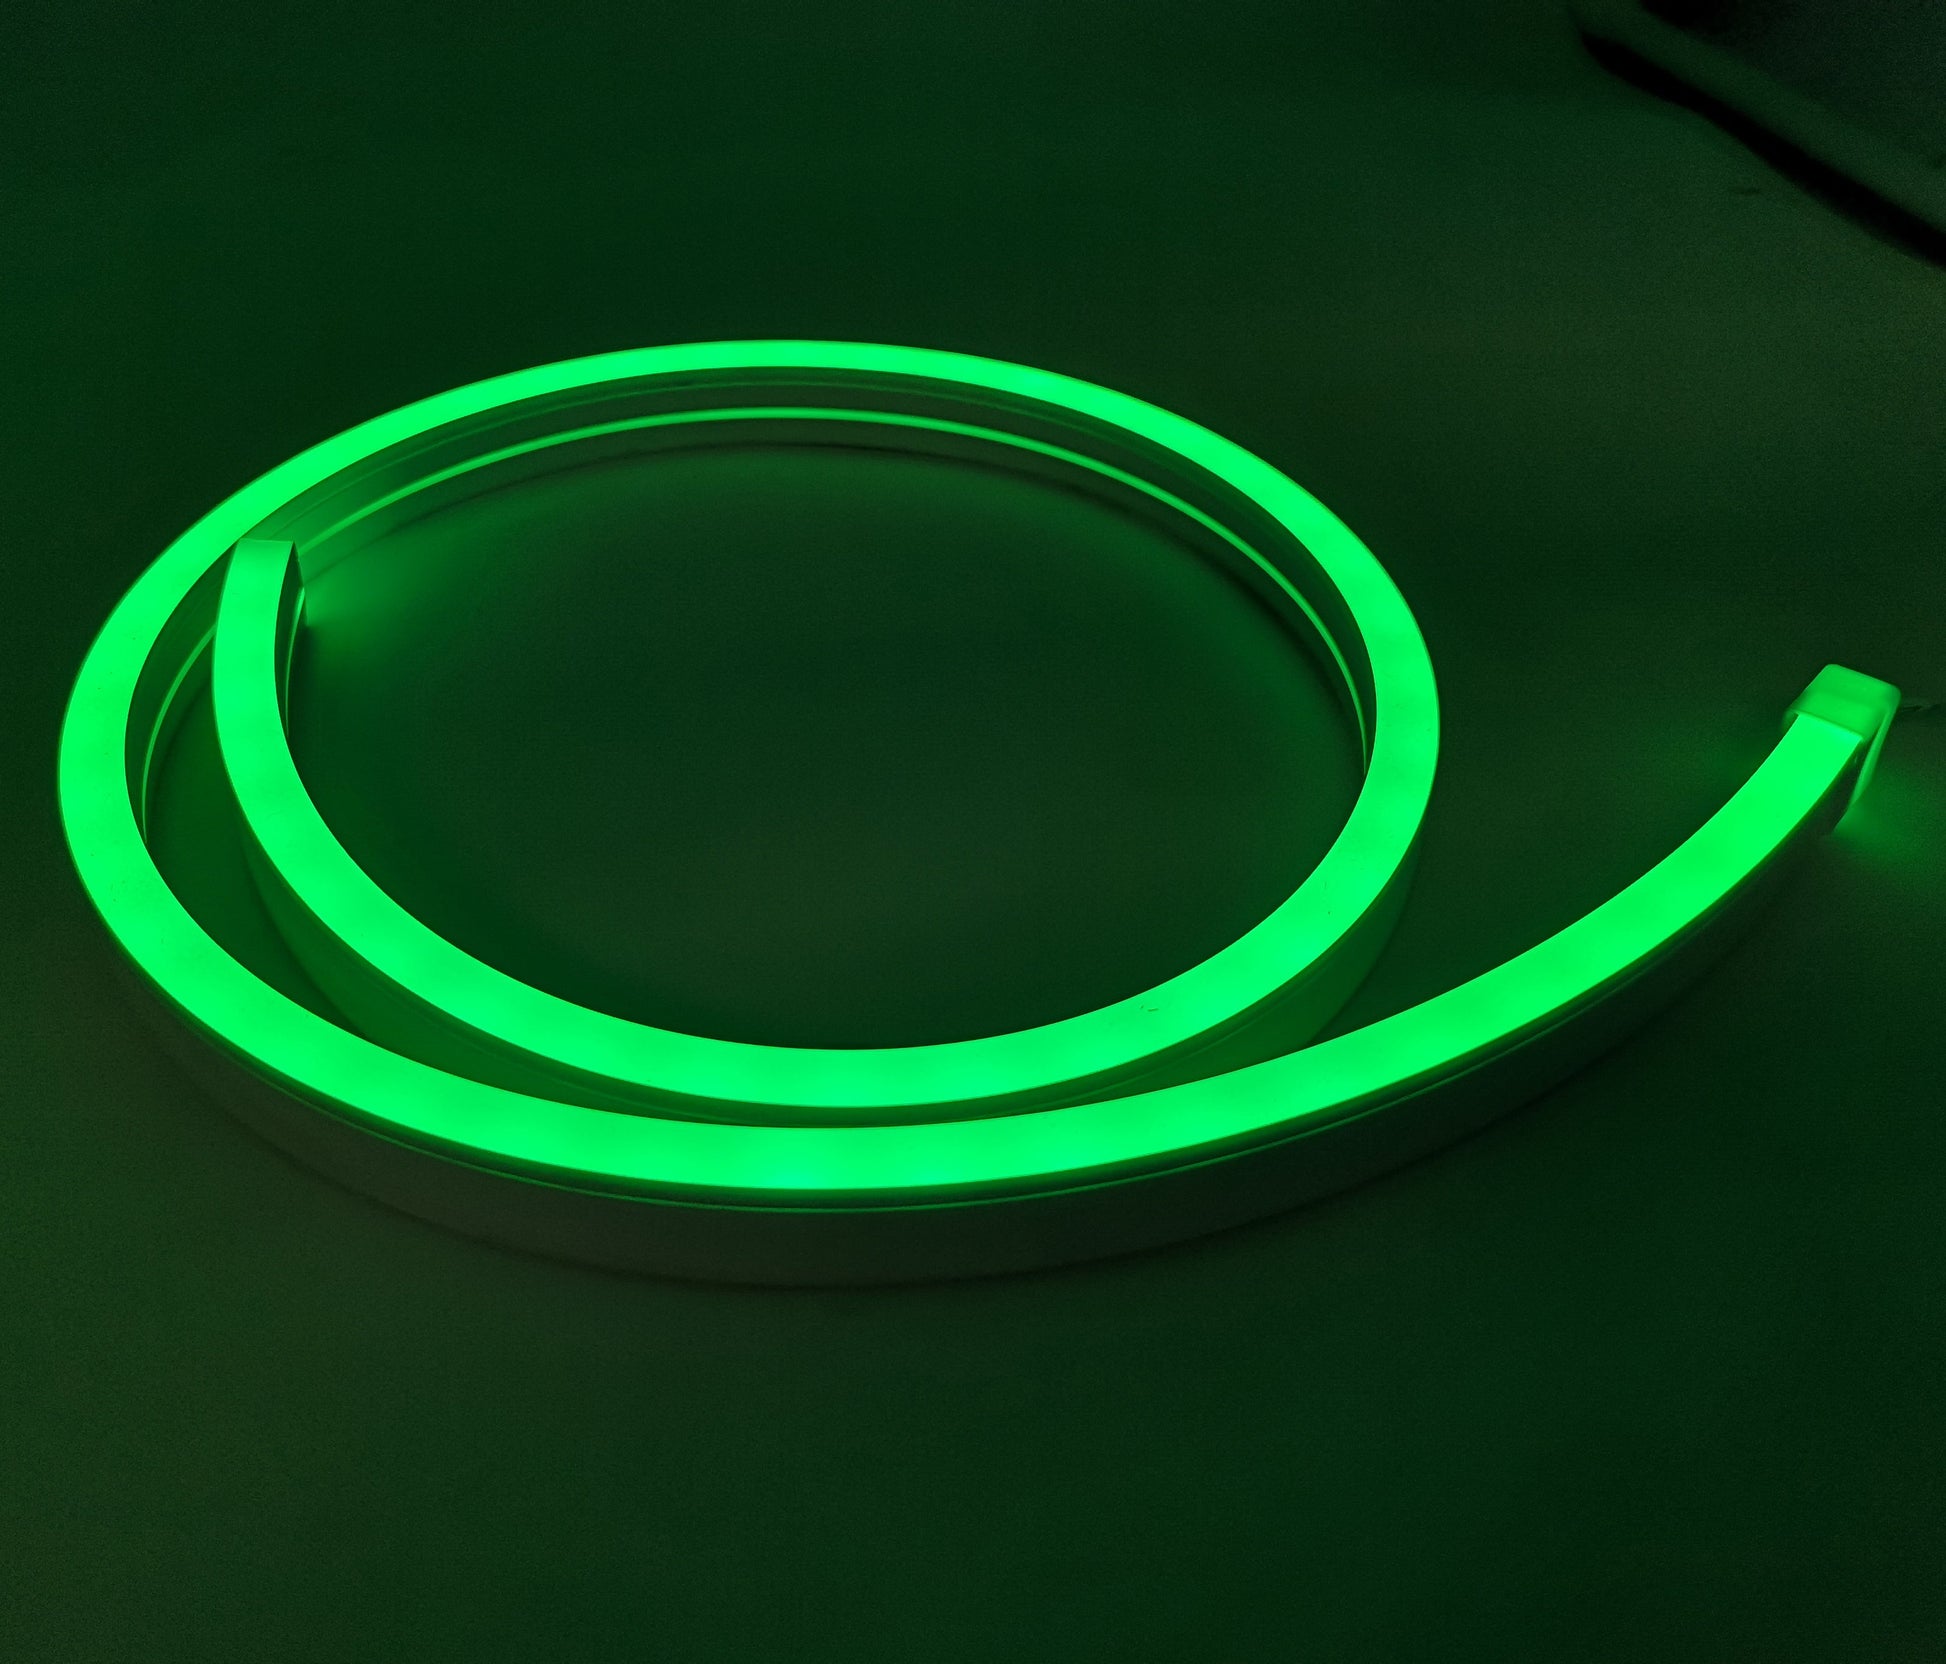 Send inquiry for 12V High Quality Neon Rope Light Recessed Mounted Silicon LED Strip Light with IP67 for Mirror, Wall Decor Manufacturers supplier. Wholesale Silicon LED Strip Light directly from ChinaNeon Rope Light manufacturers/exporters. Get a factory sale price list and become a distributor/agent-vstled.com